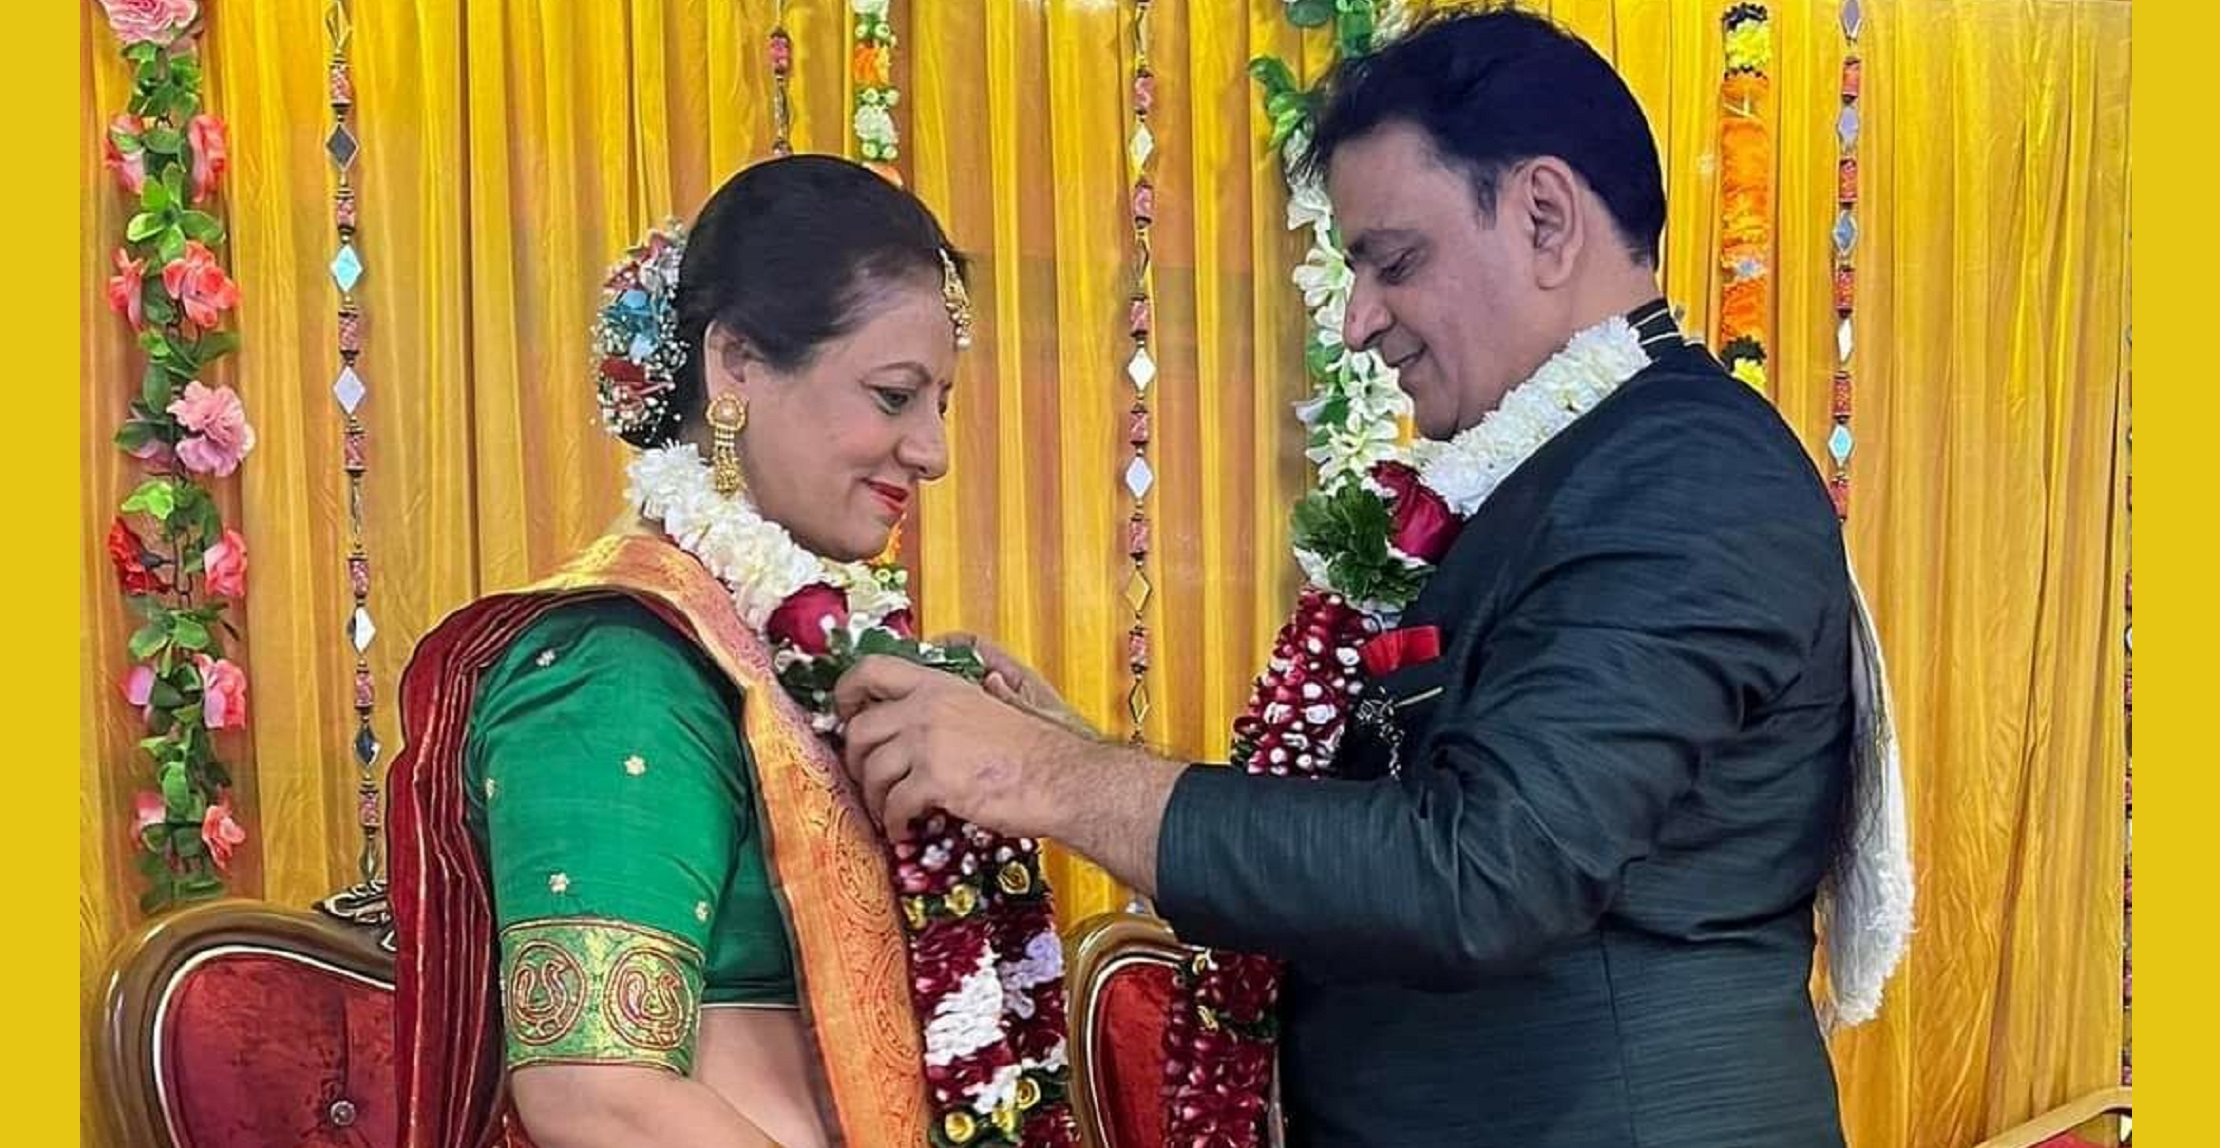 Mother Finds Love Again, Gets Married At 52, Her Son Proudly Shares Inspiring Story